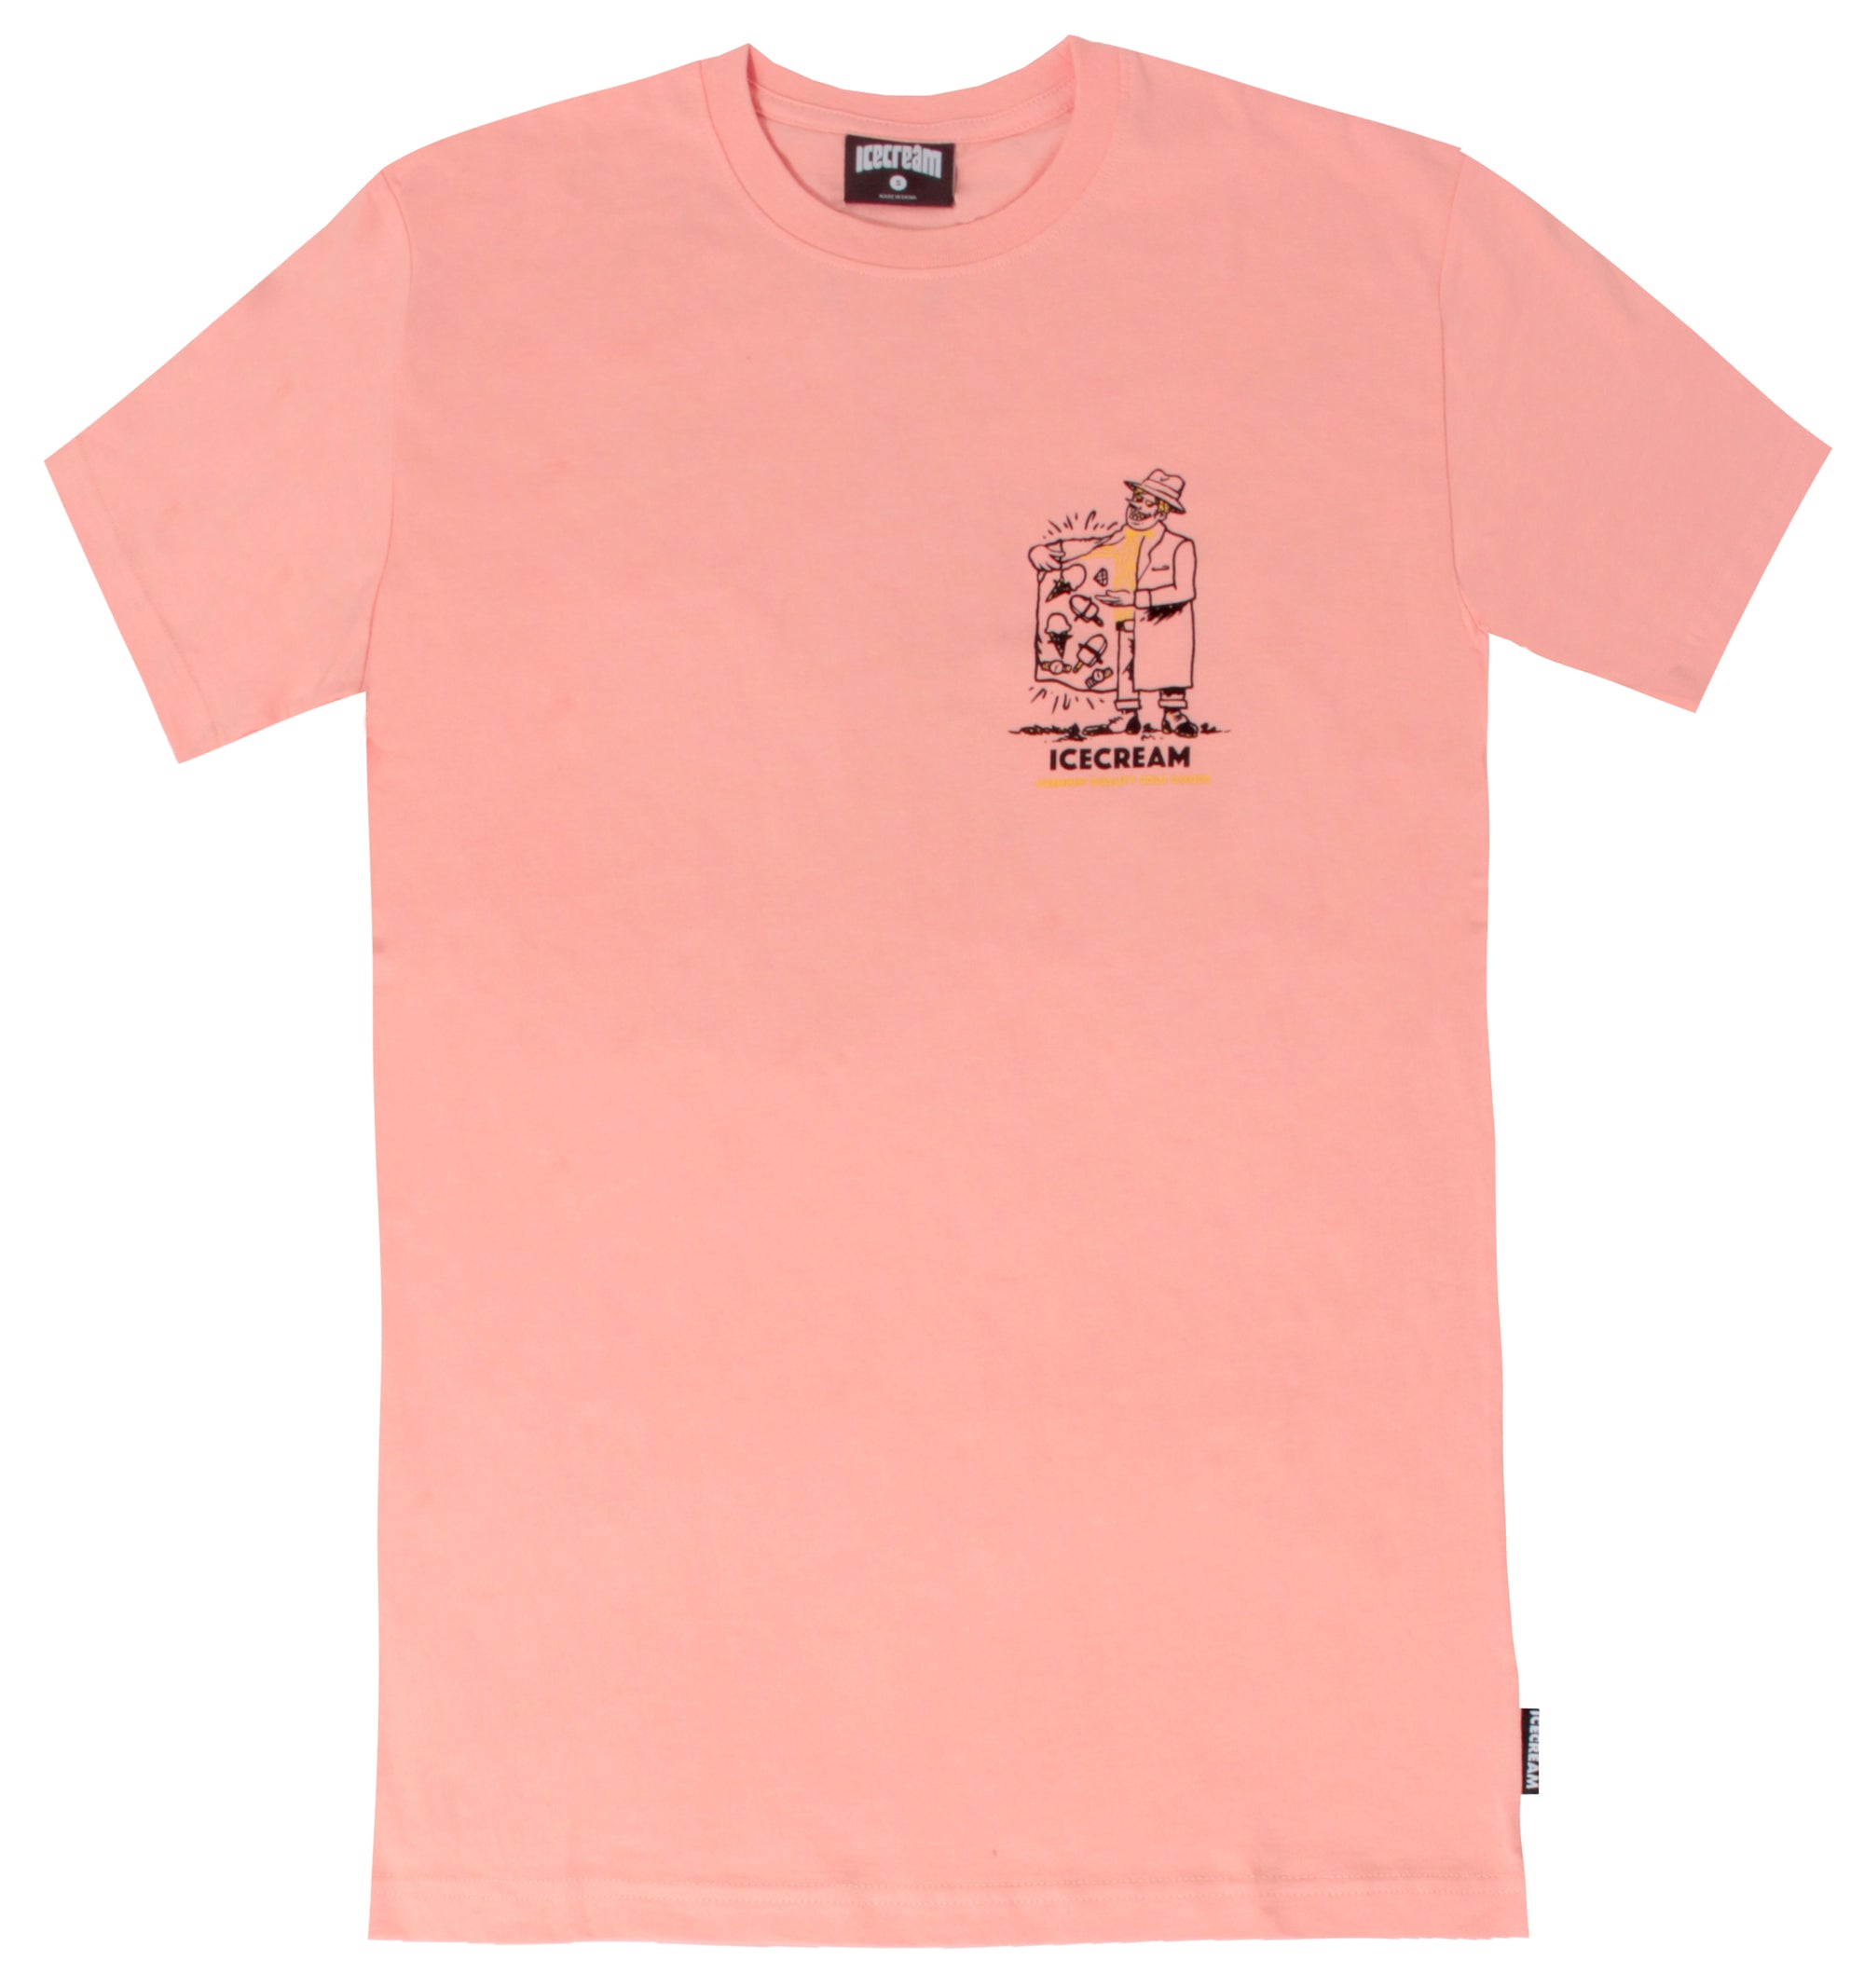 Nathan SS Tee - Candle Light Peach